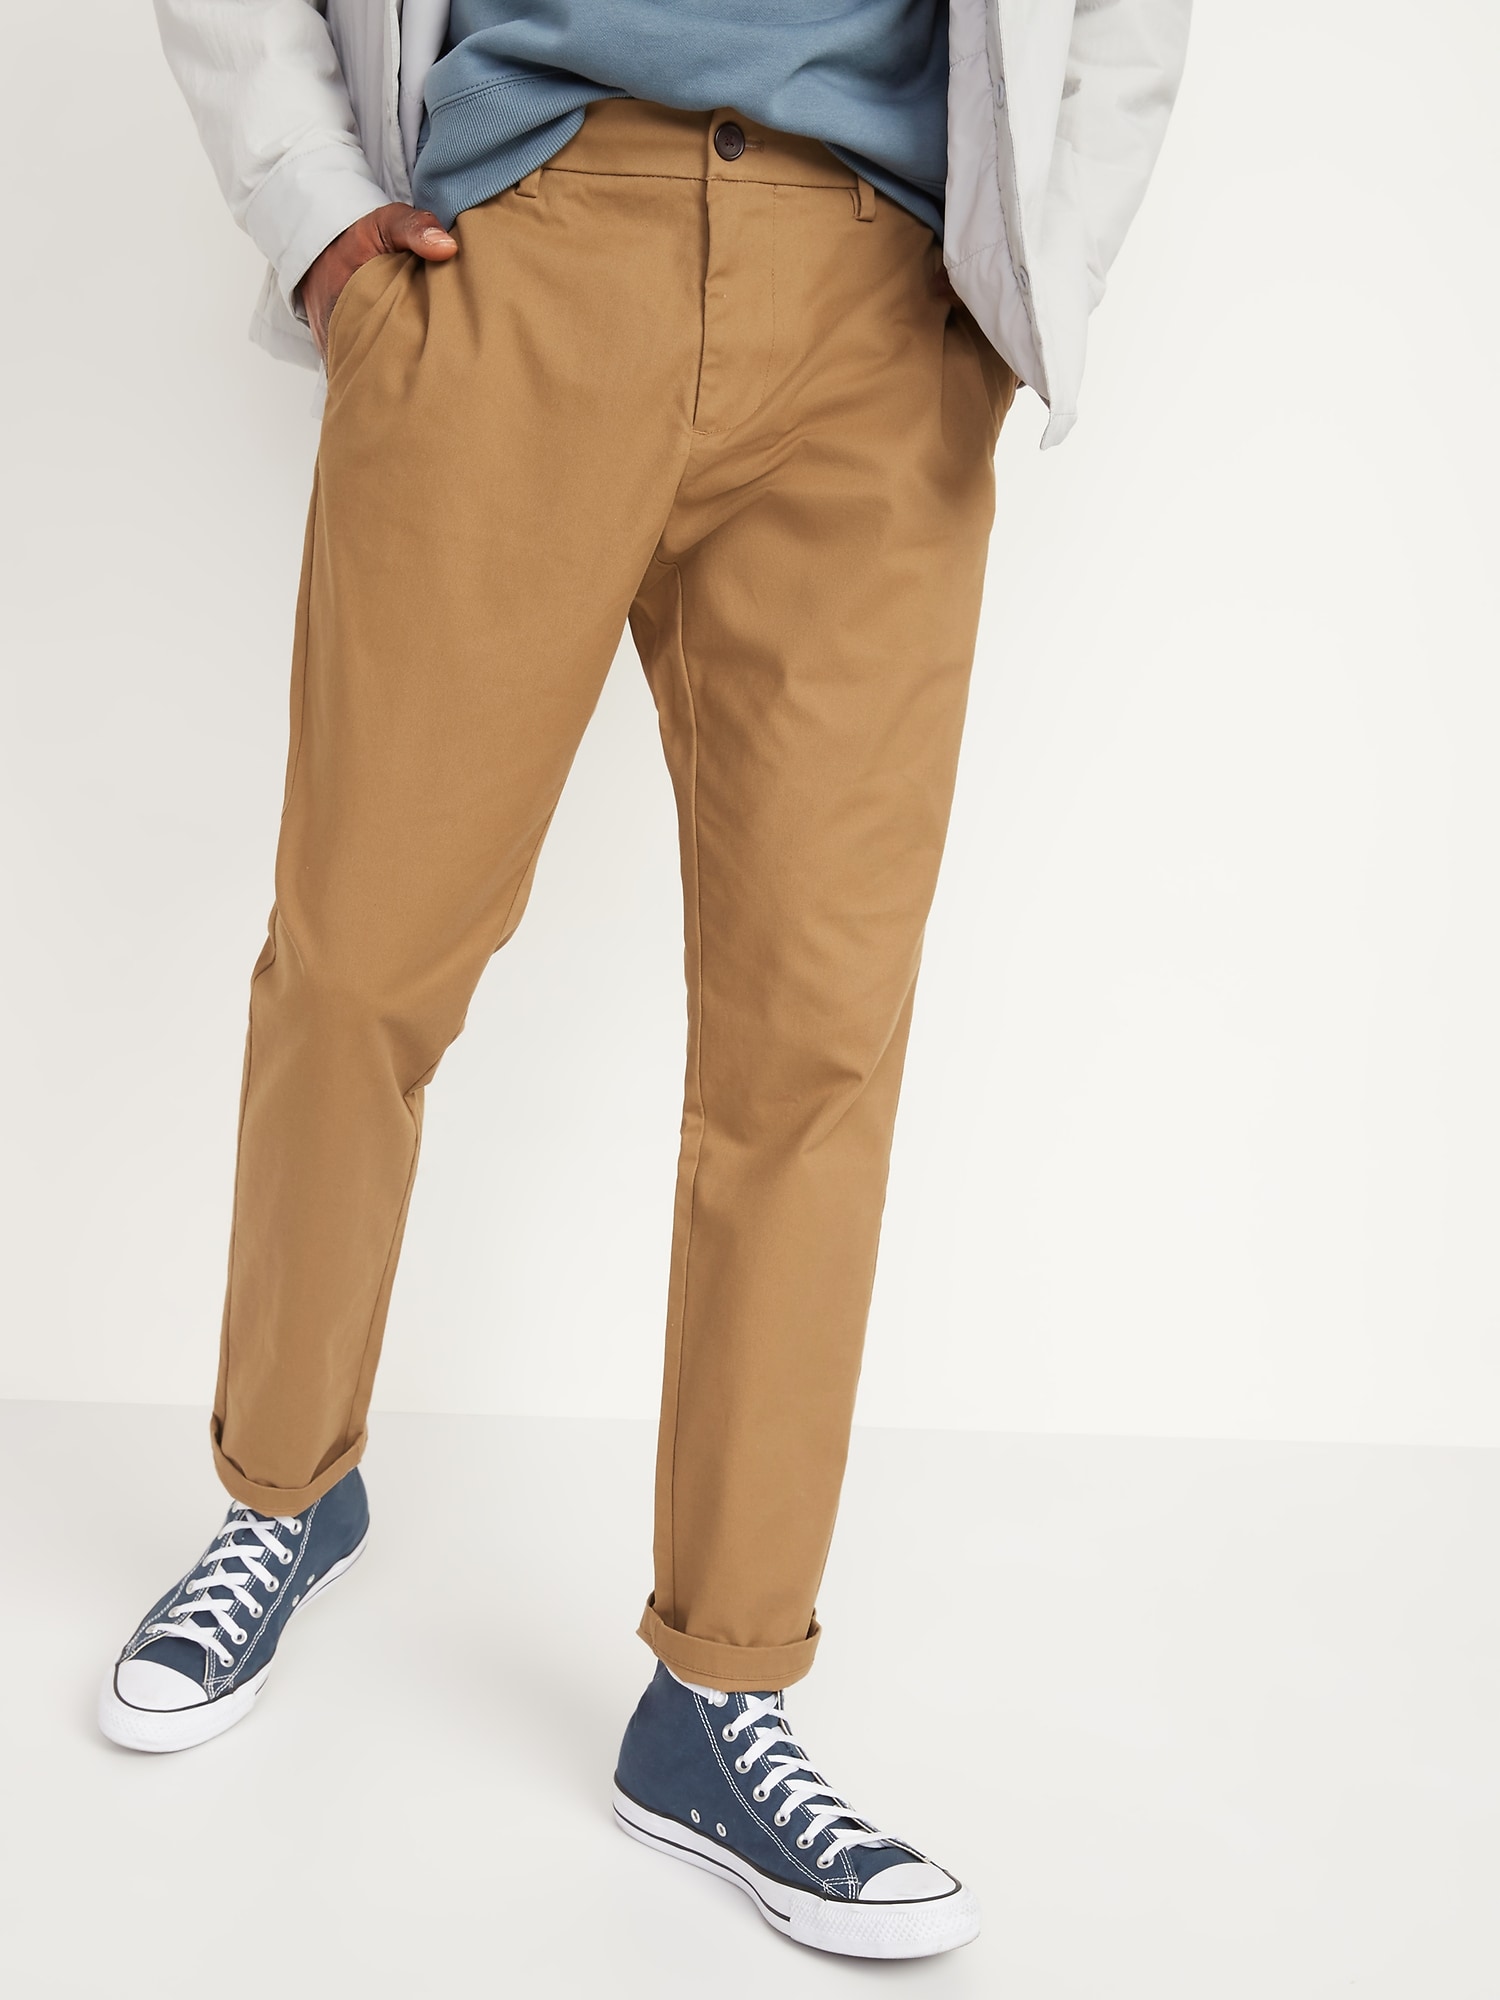 Athletic Ultimate Built-In Flex Chino Pants